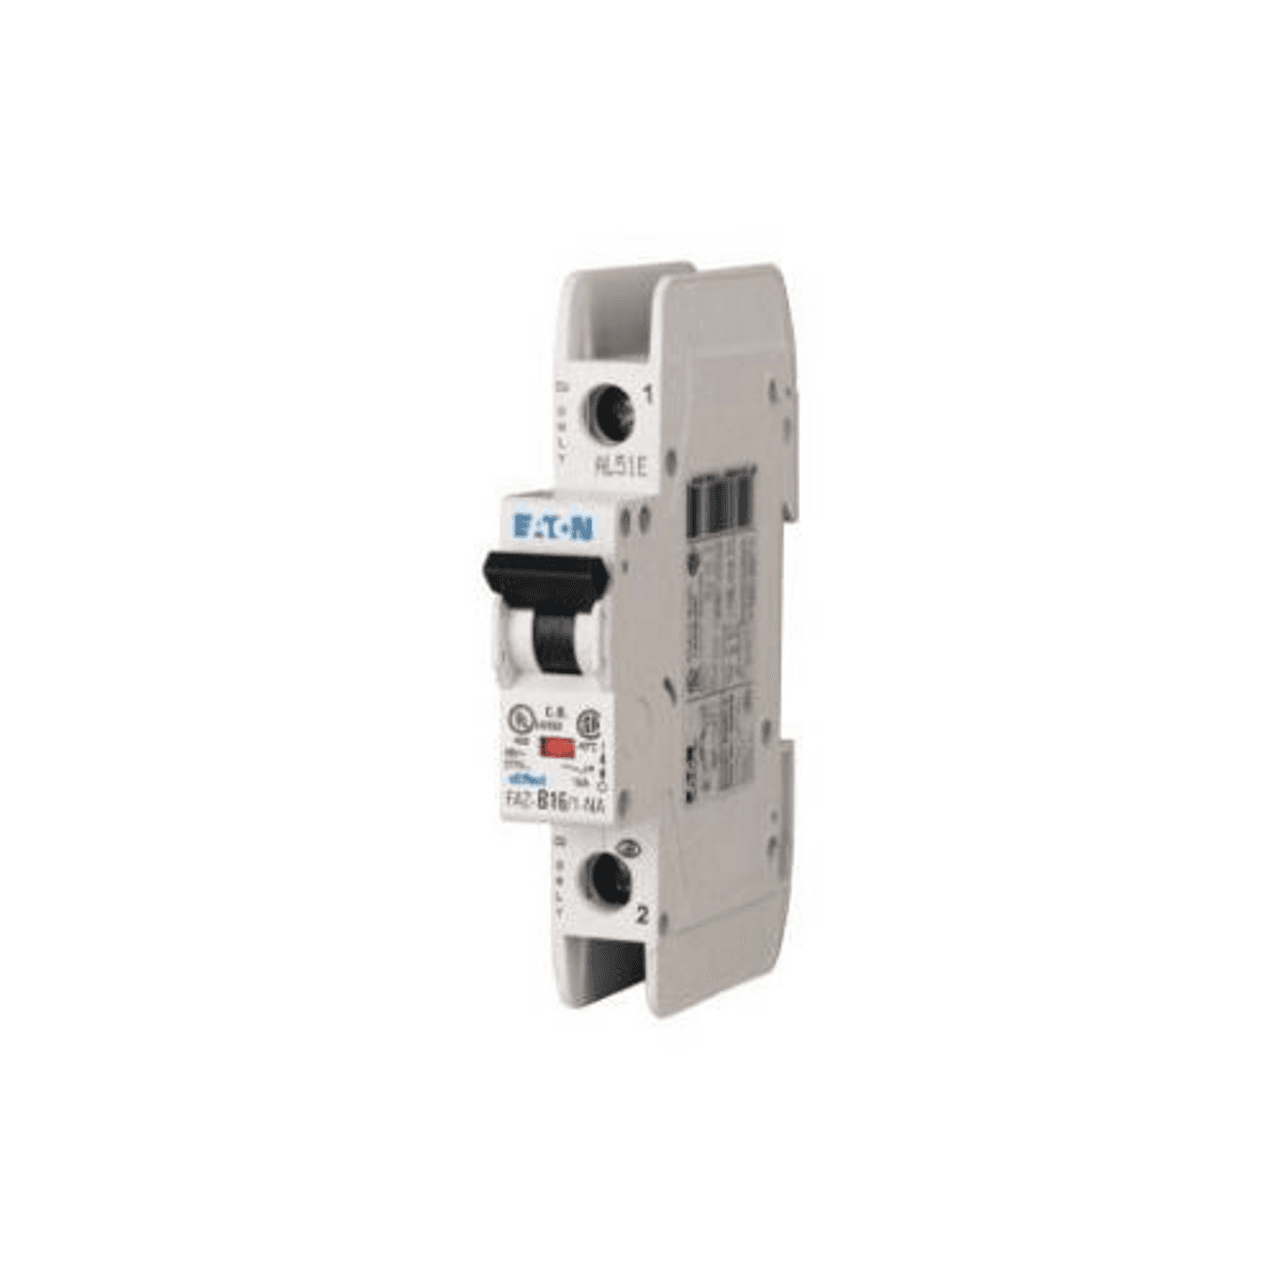 Eaton FAZ-C1.5/1-NA-SP Eaton FAZ branch protector,UL 489 Industrial miniature circuit breaker - supplementary protector,Single package,Medium levels of inrush current are expected,1.5 A,10 kAIC,Single-pole,277 V,5-10X /n,Q38,50-60 Hz,Screw terminals,C Curve